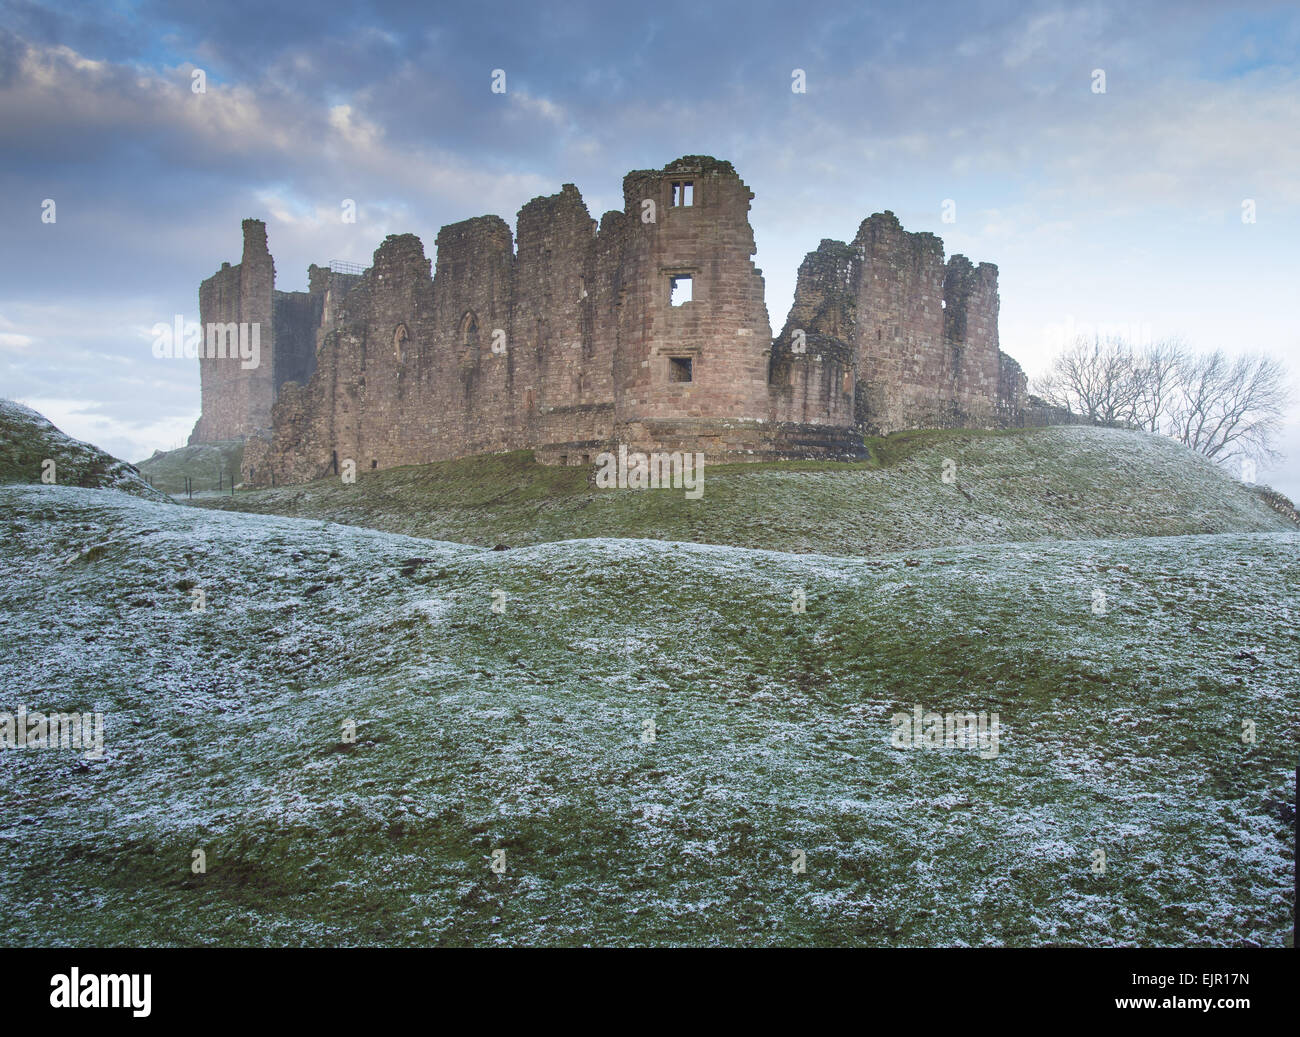 View of ruined castle in frost at dawn, Brough Castle, Church Brough, Kirkby Stephen, Cumbria, England, December Stock Photo